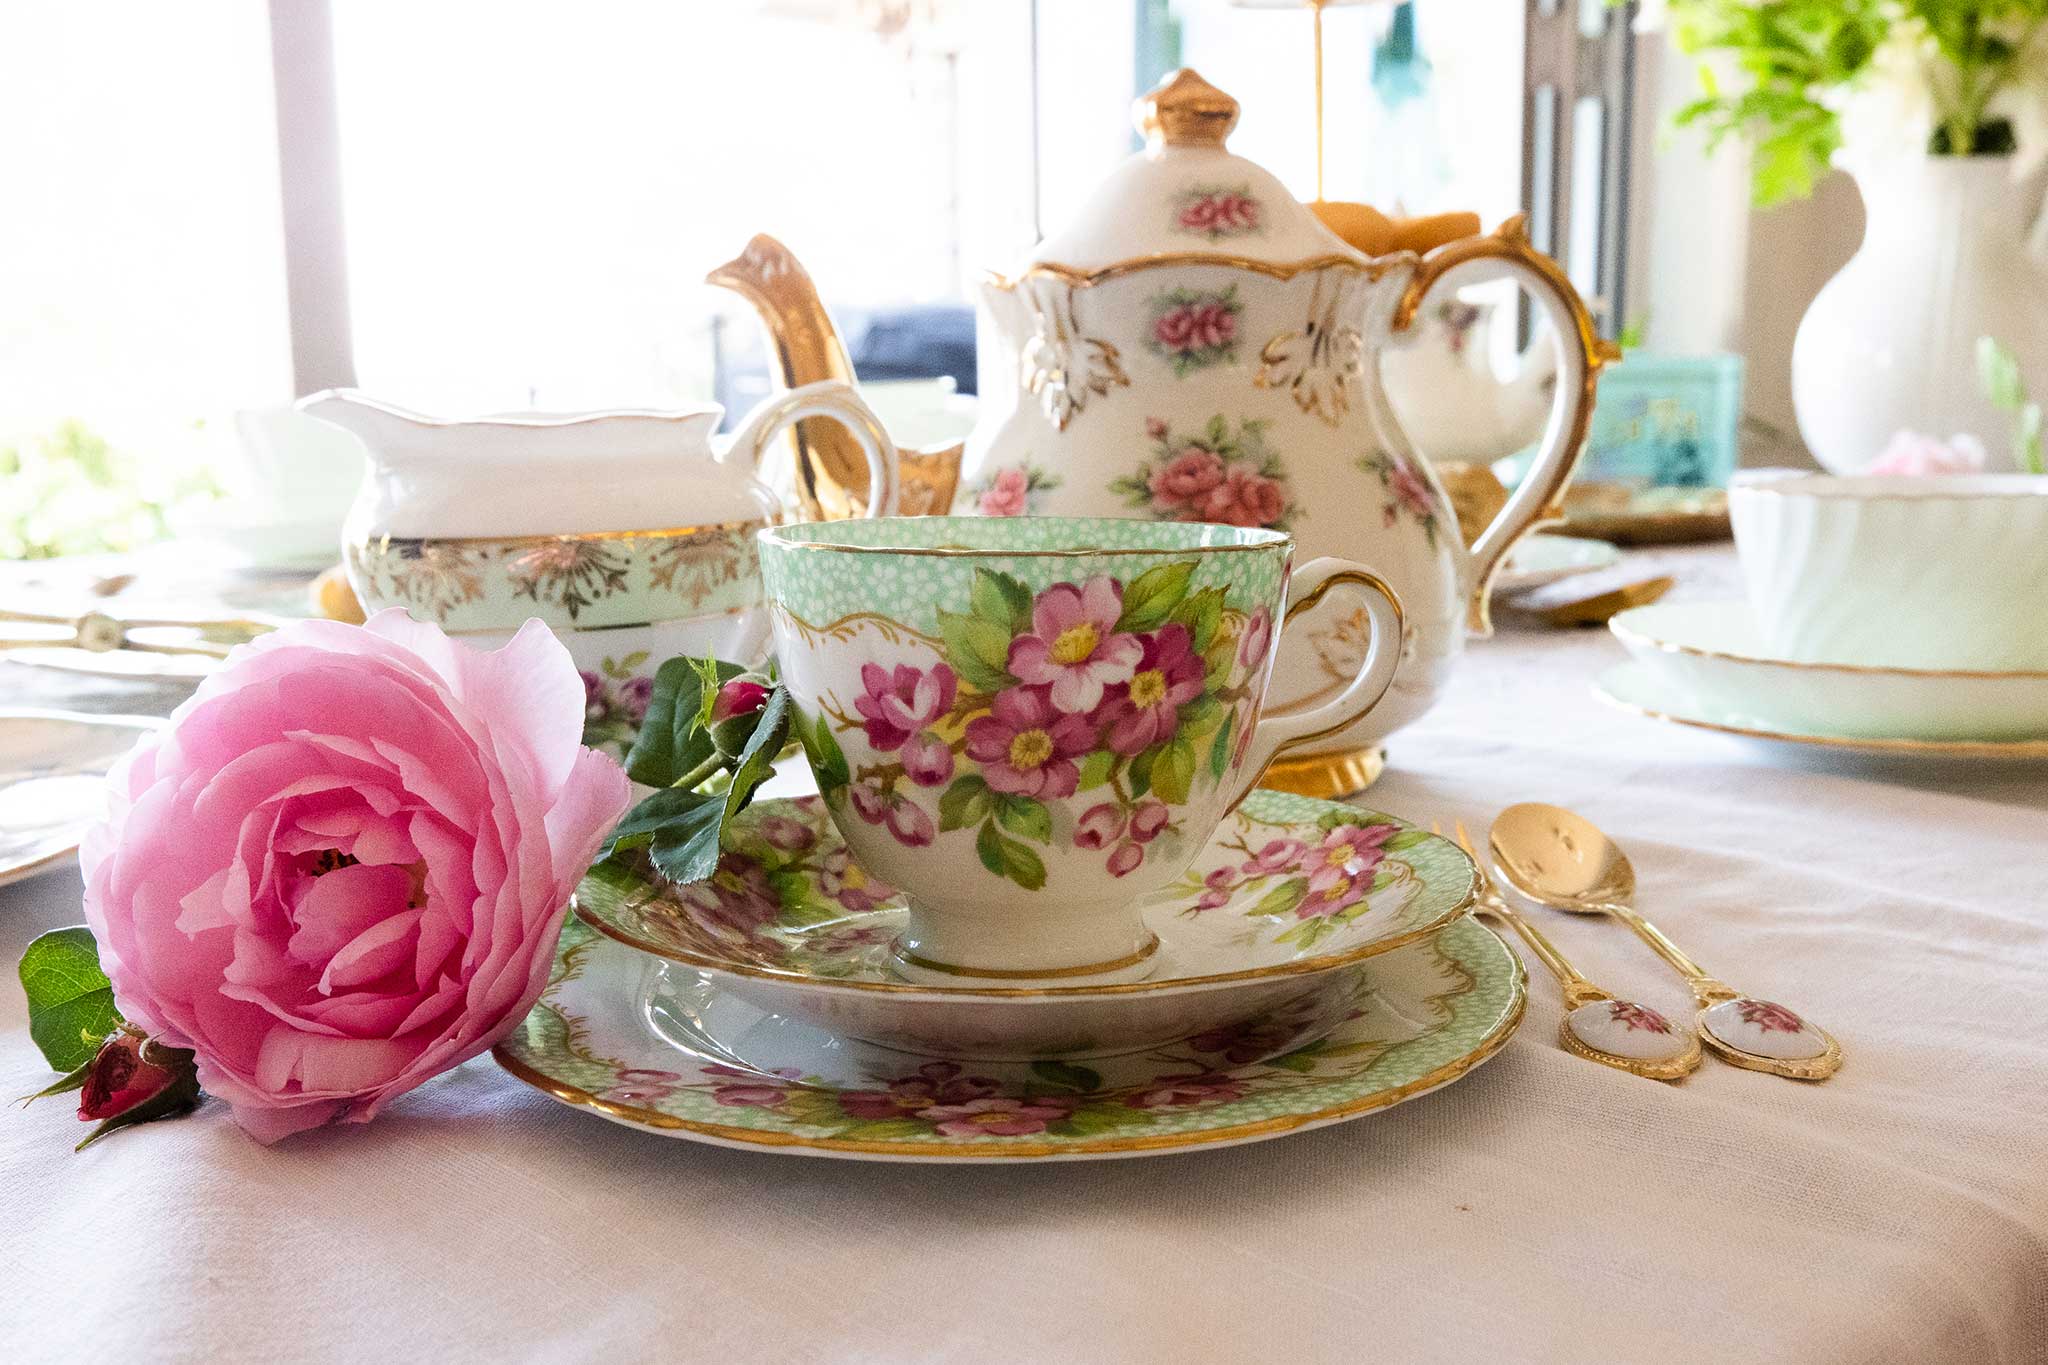 High Tea hire in the Bay Area